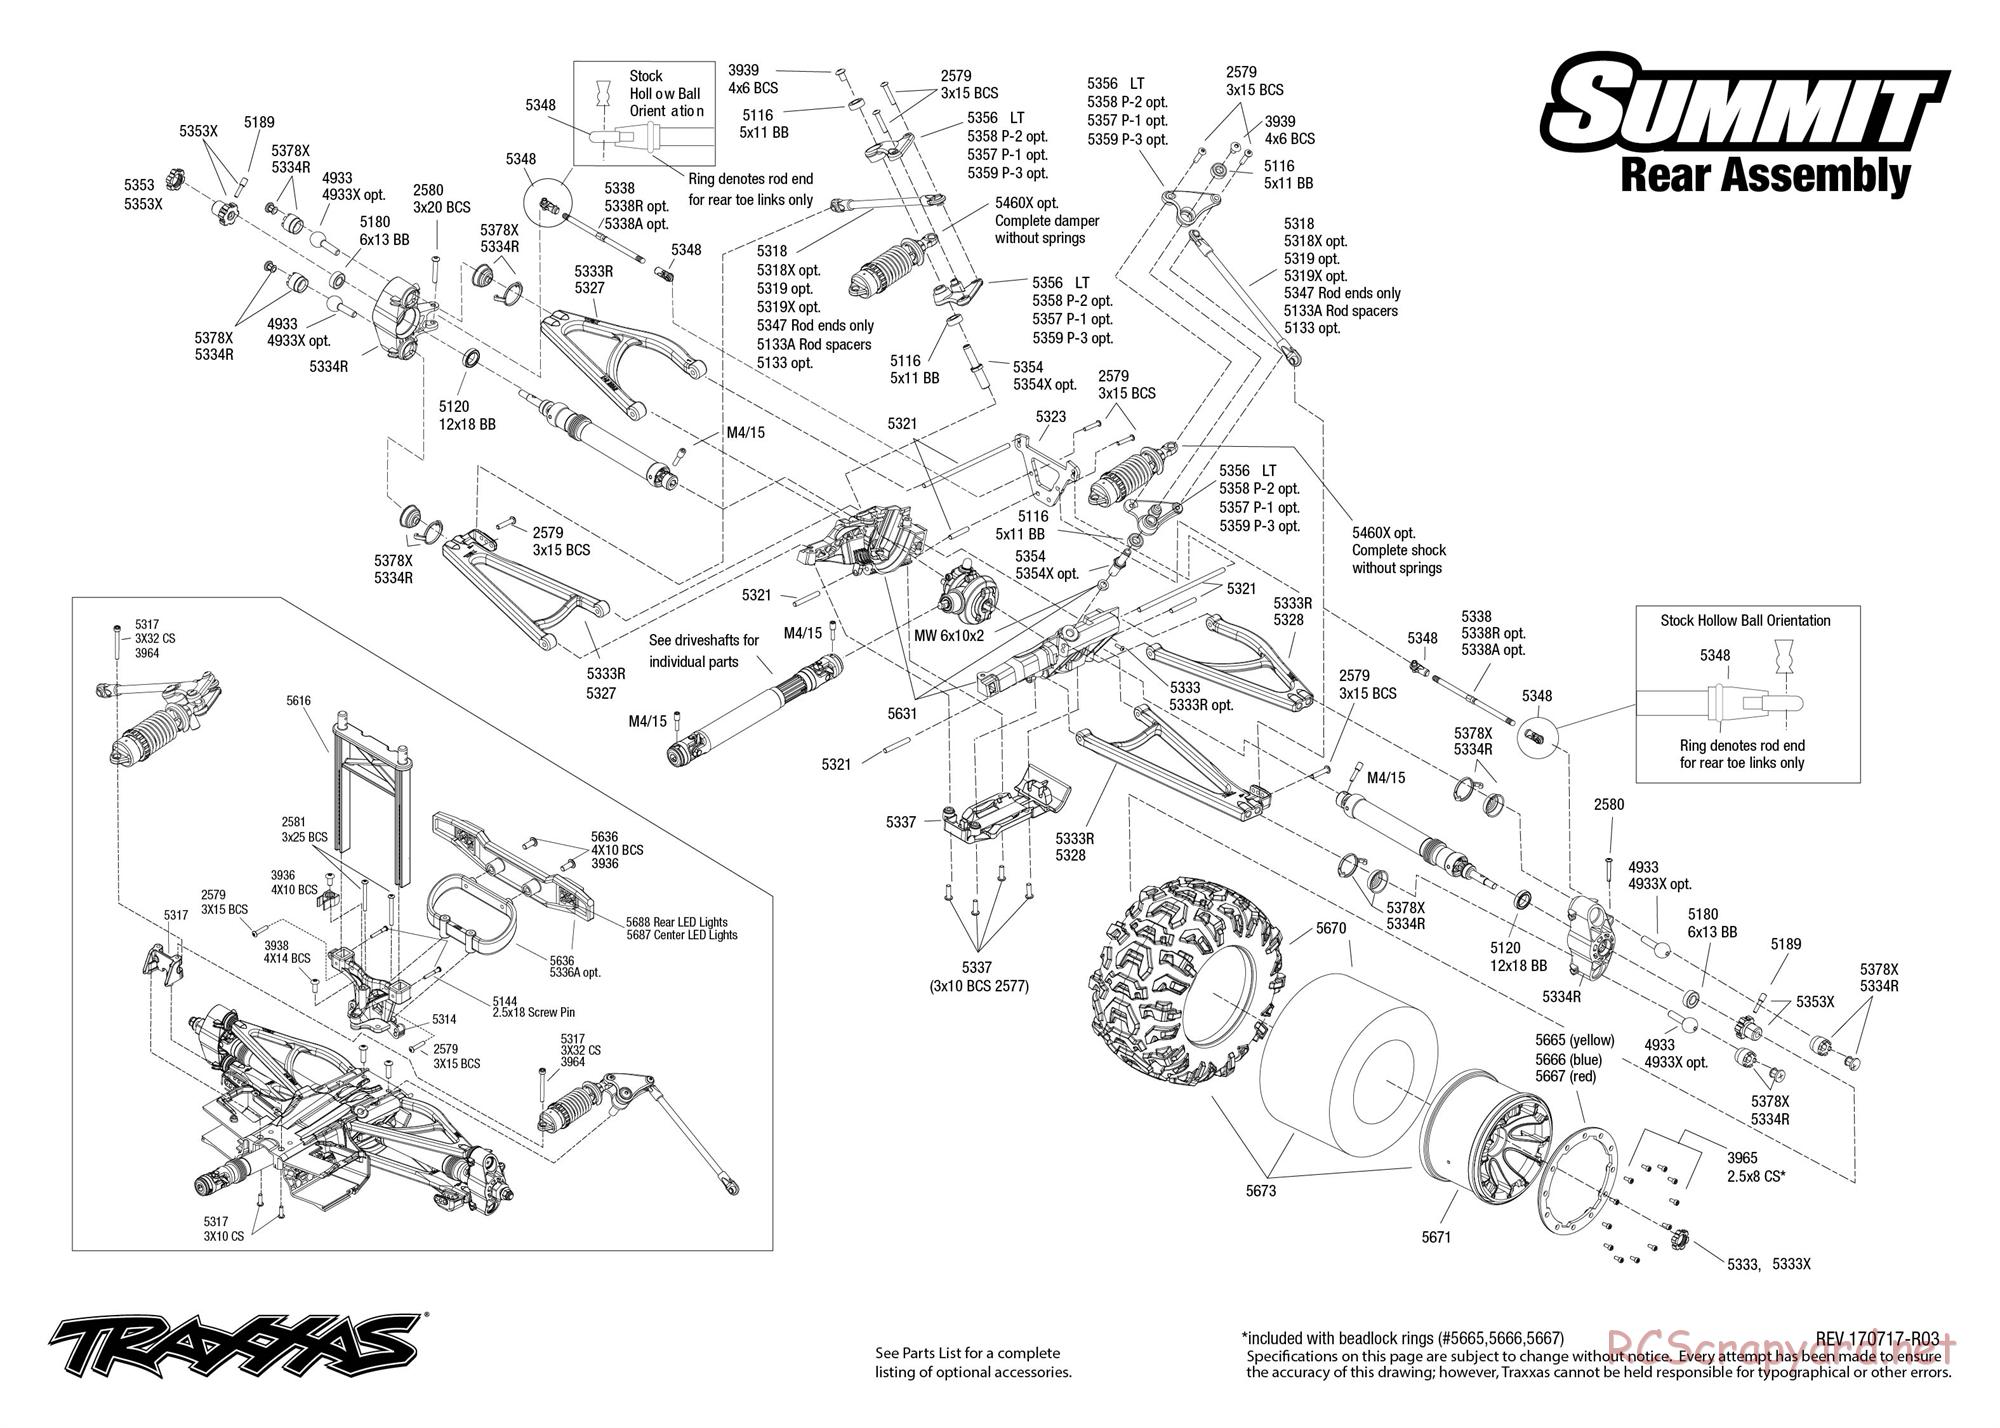 Traxxas - Summit (2015) - Exploded Views - Page 4